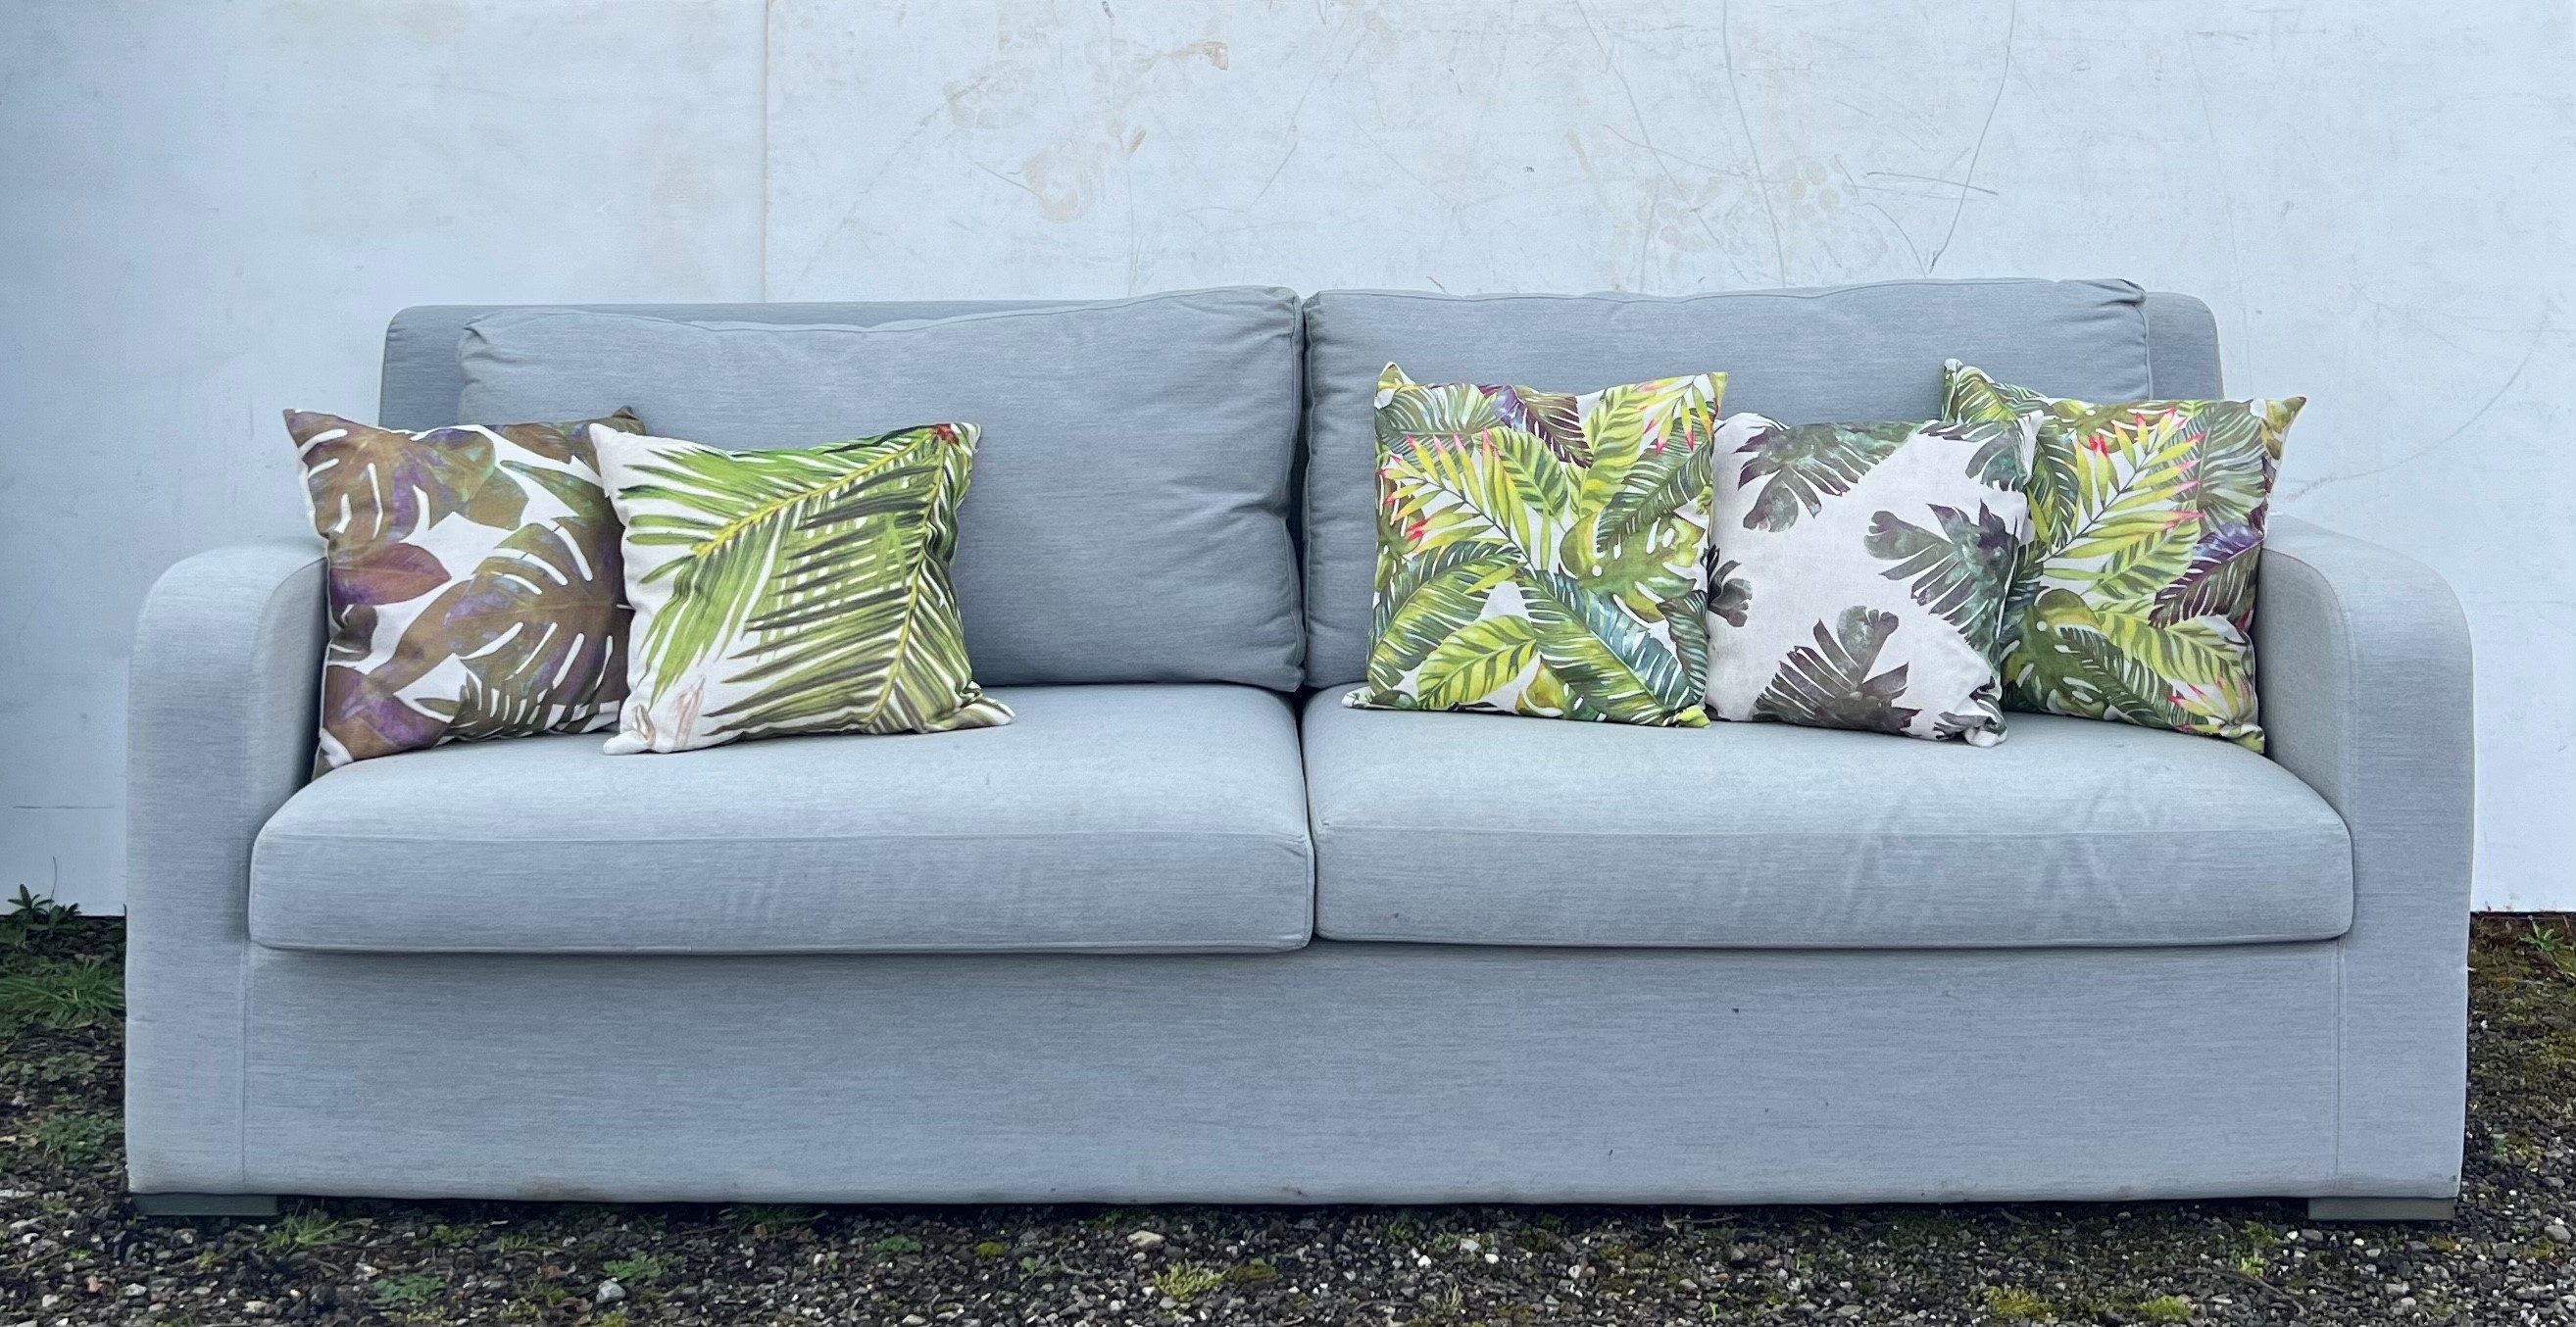 Maze Living 3 seater, outdoor sofa, light grey + 5 tropical patterned cushions, 230cmW x 82cmH x